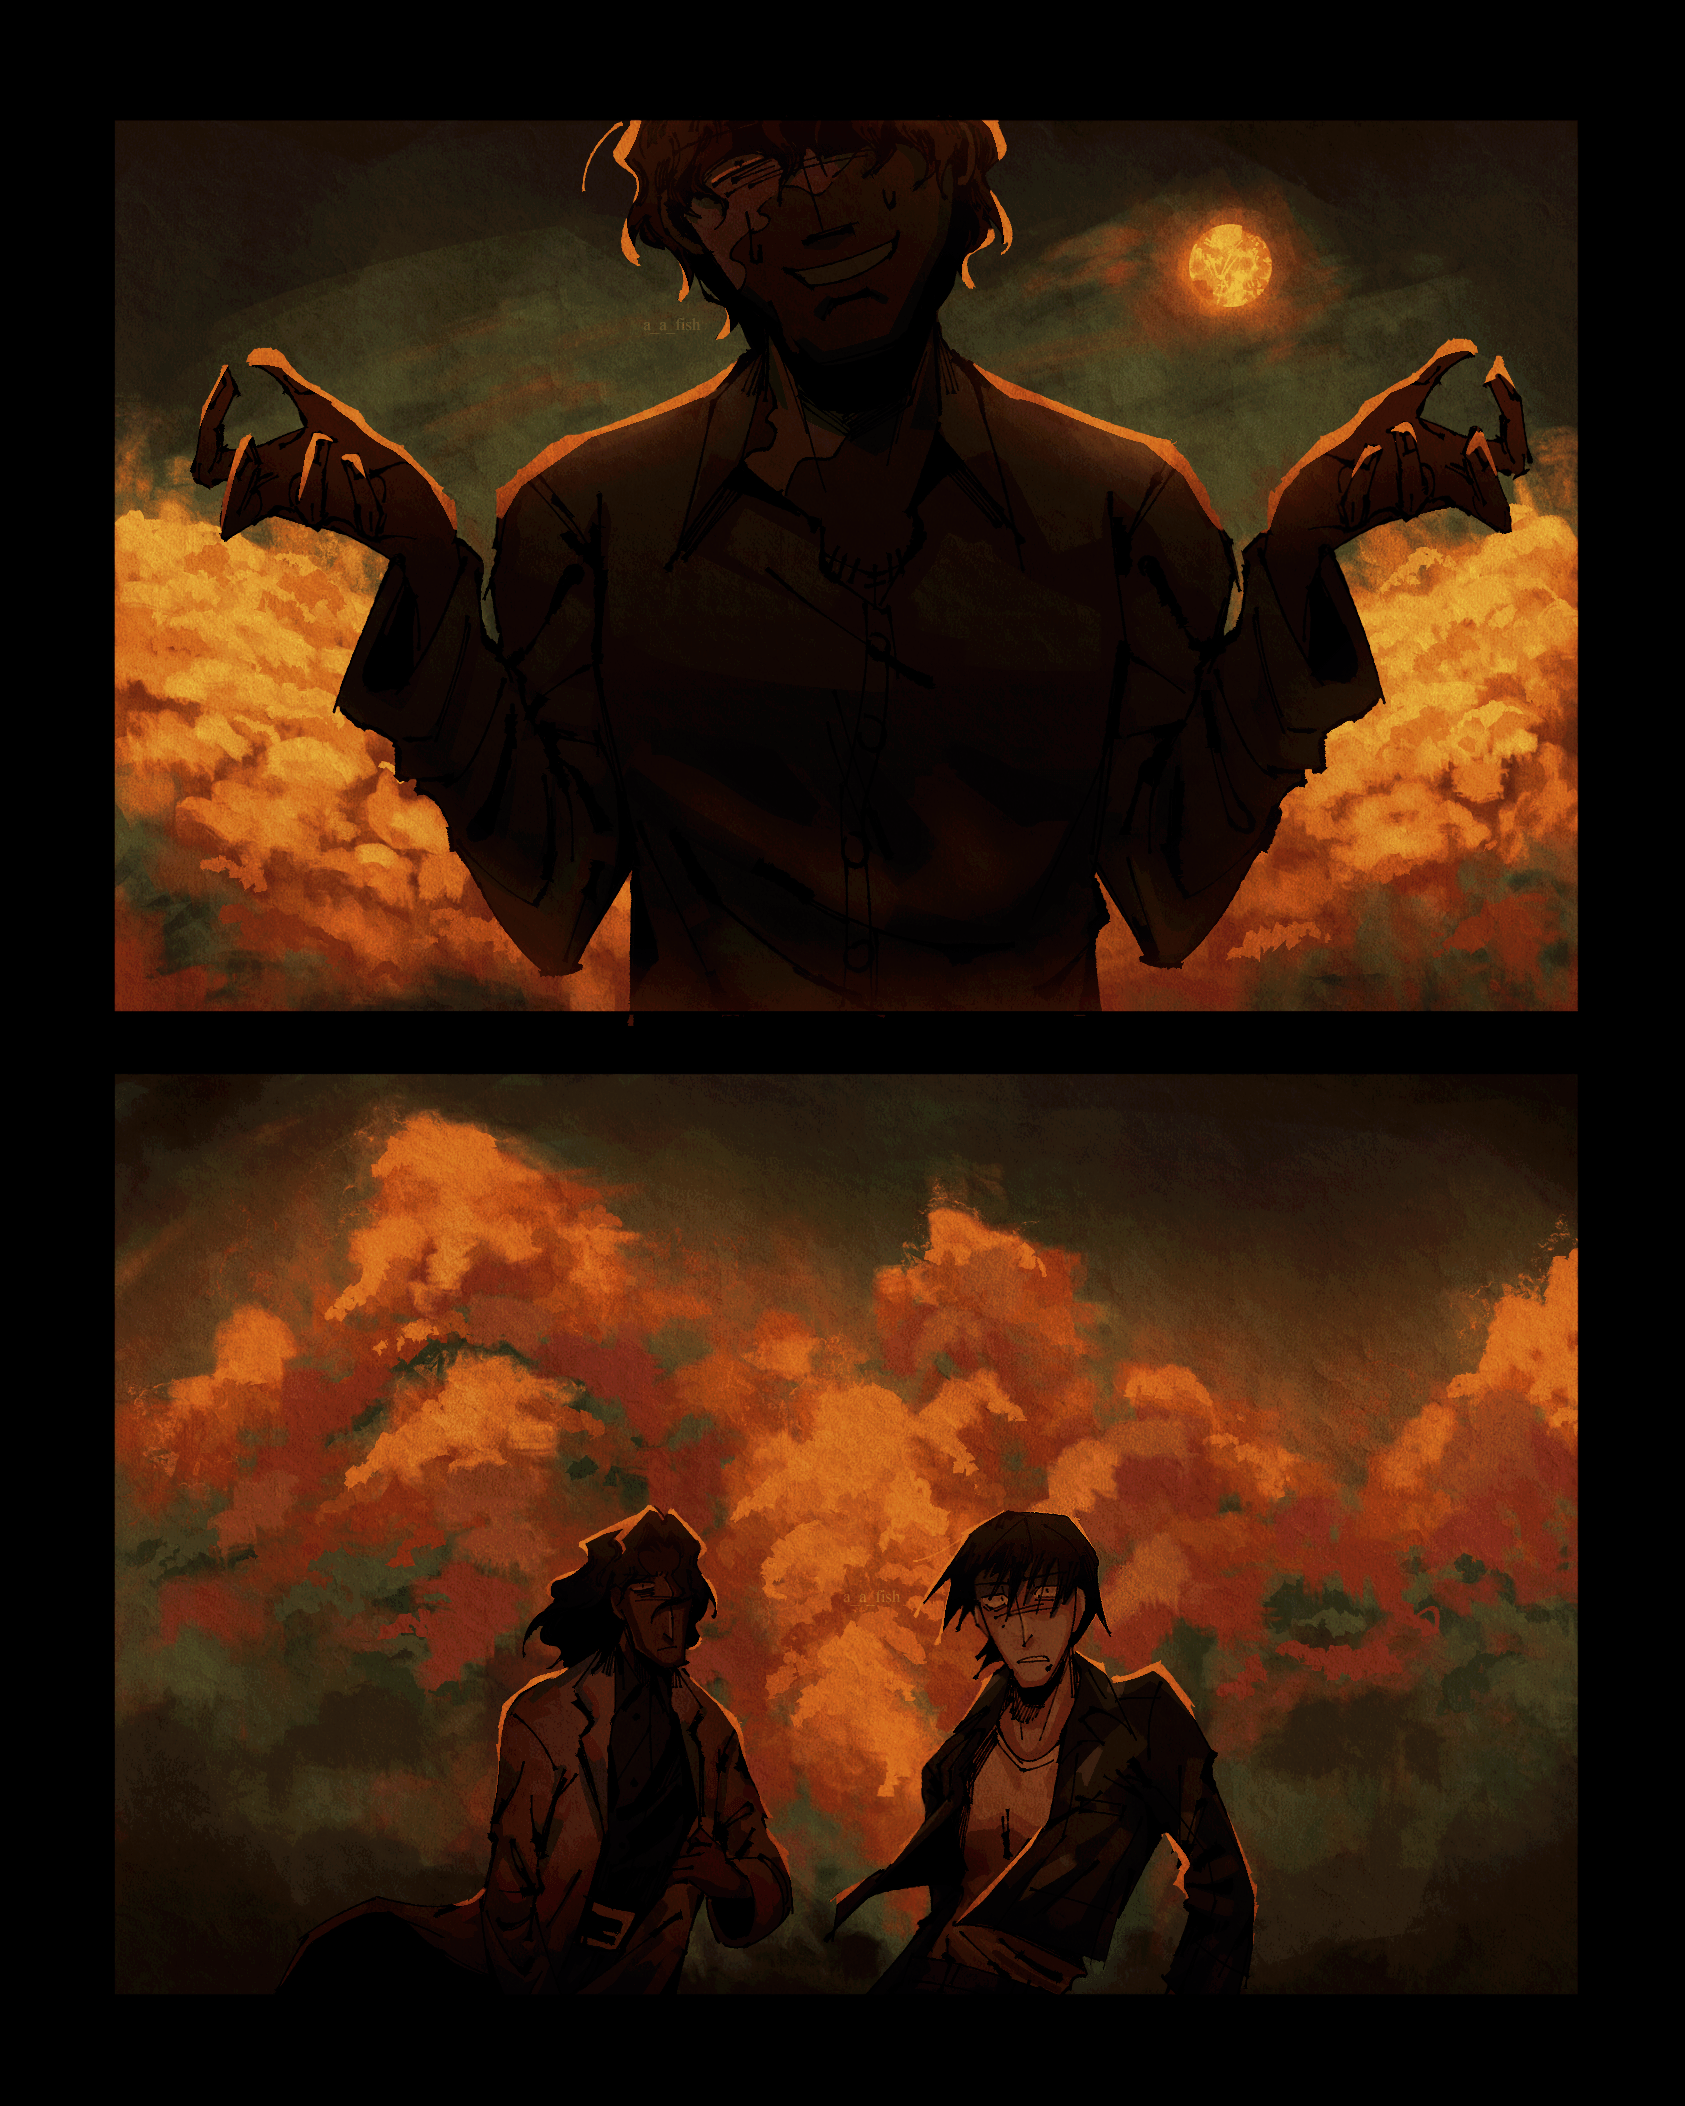 A two panel illustration of my characters Dahlia (top panel), Ven, and Mei (bottom panel). Takes place somewhere ambigous at the time of a sunset.